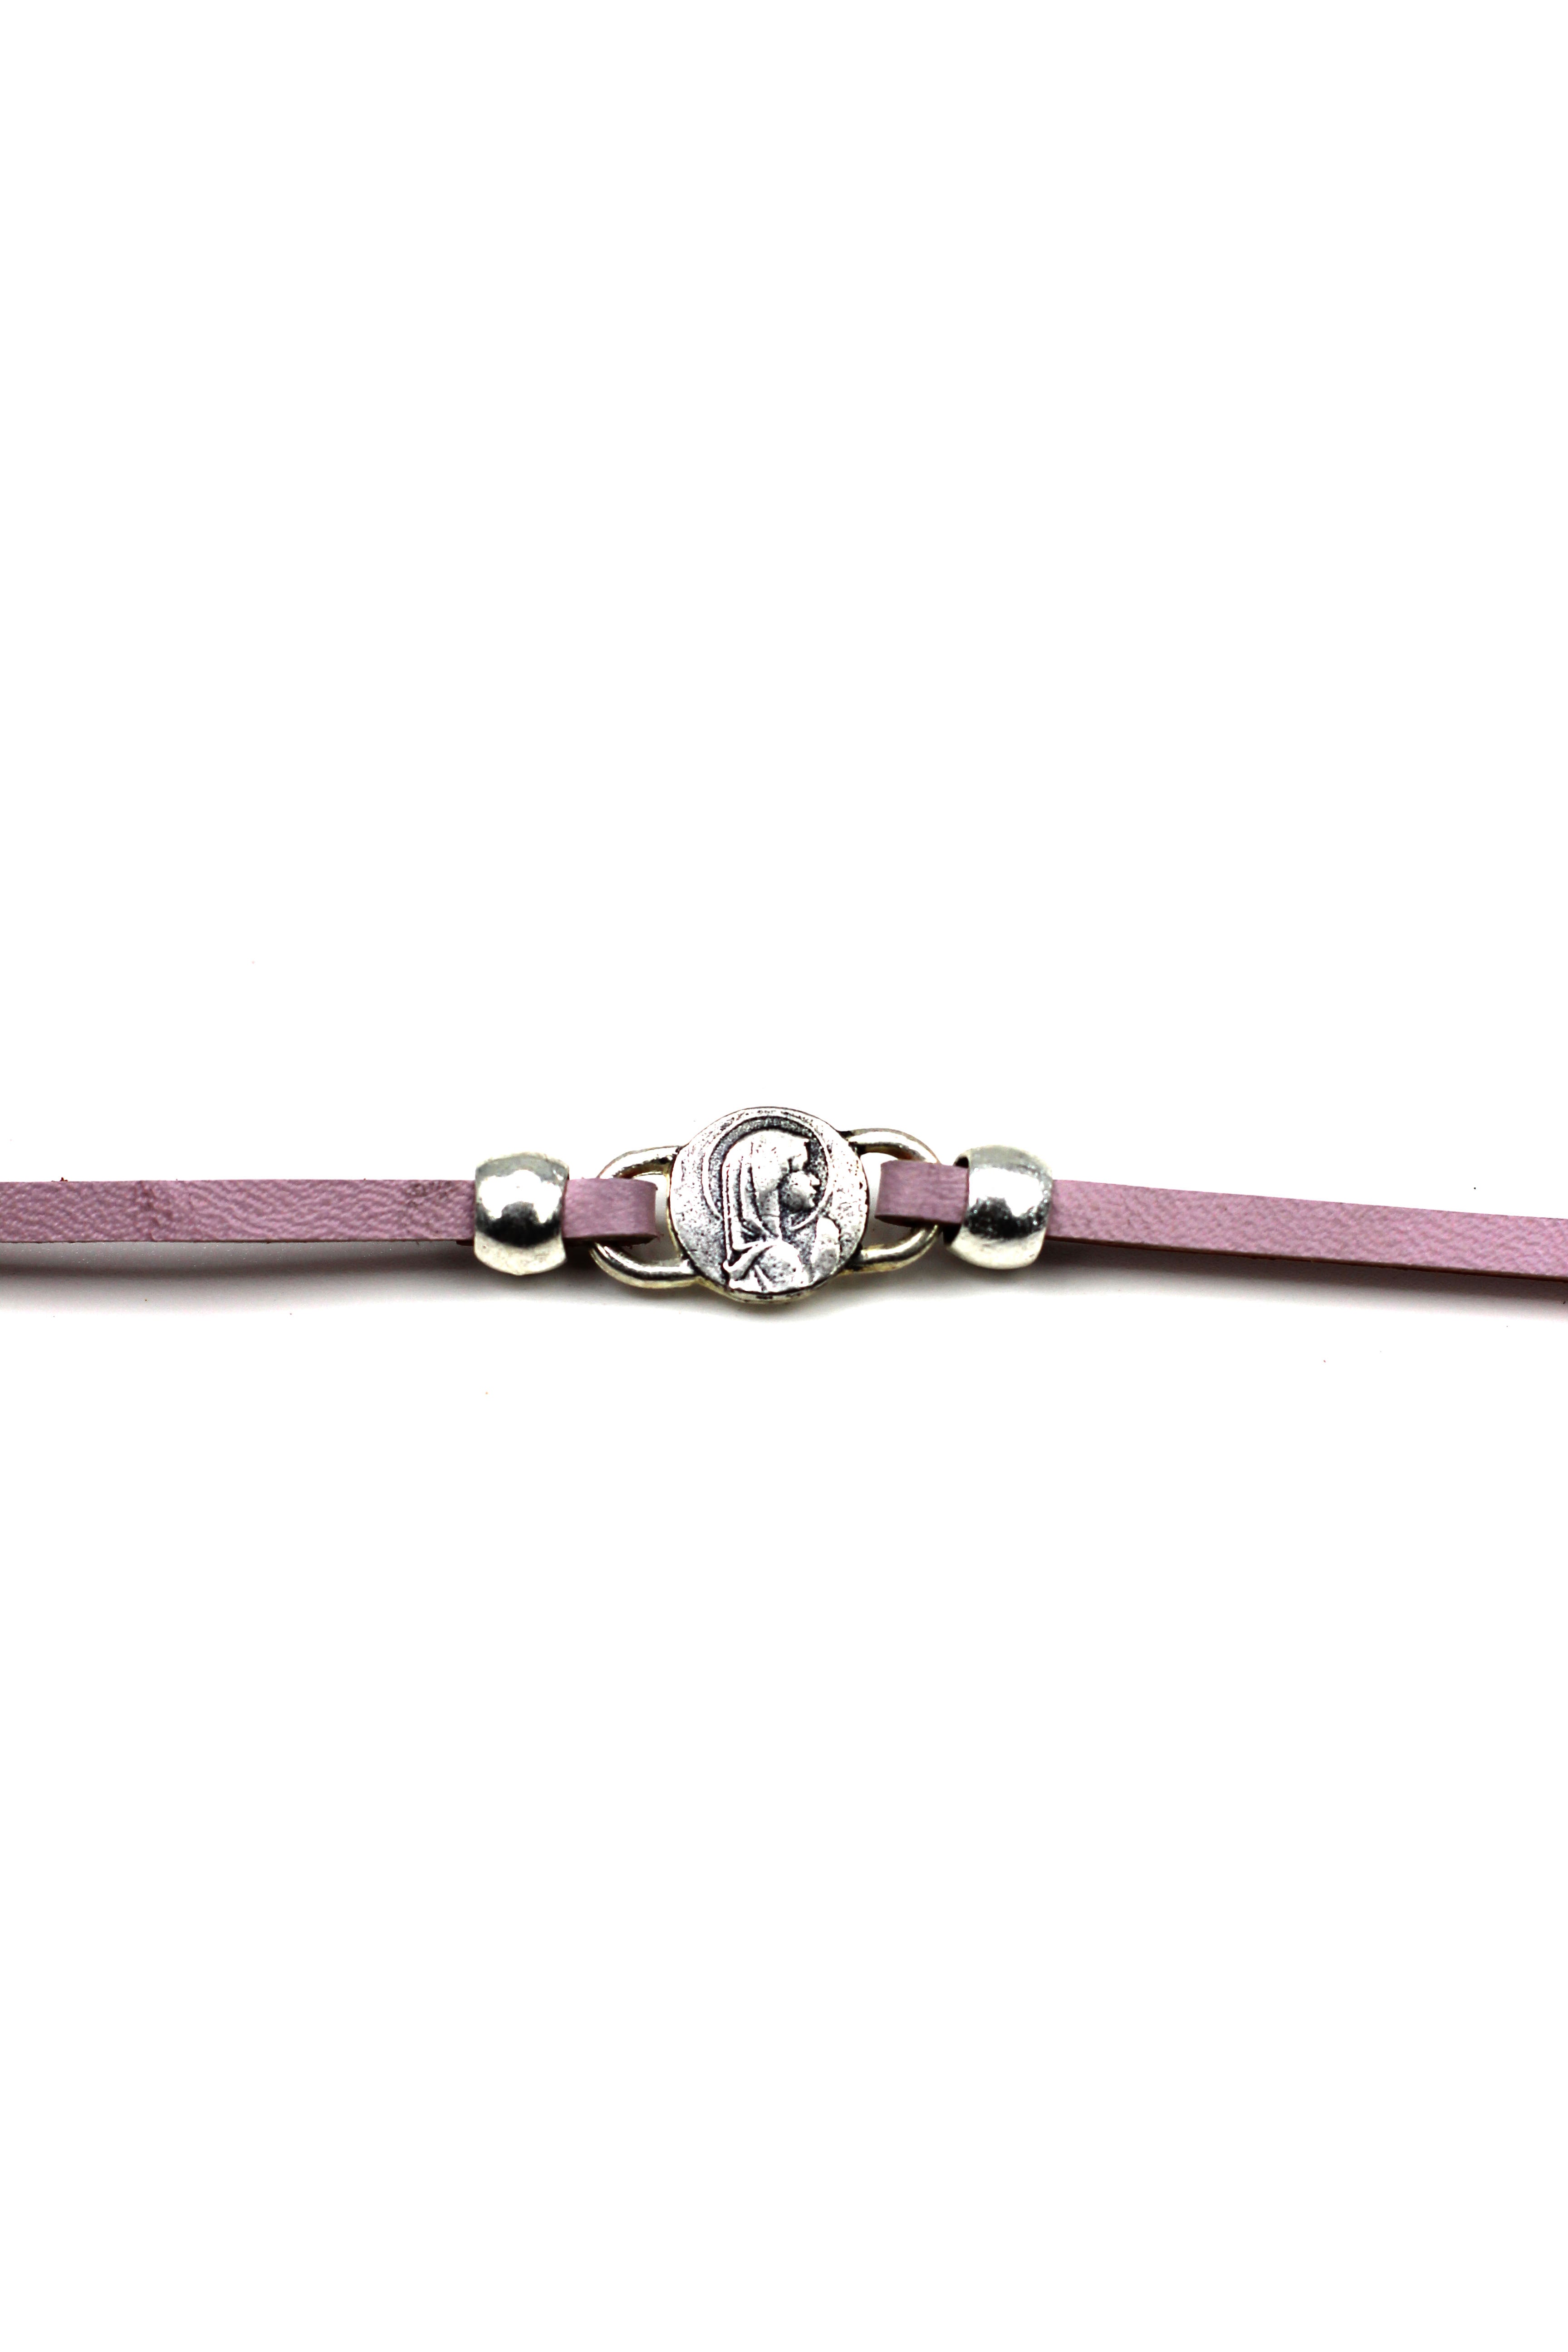 Girl Bracelet of  Young Virgin Mary  handmade jewelry with a Single Leather Strap by Graciela's Collection